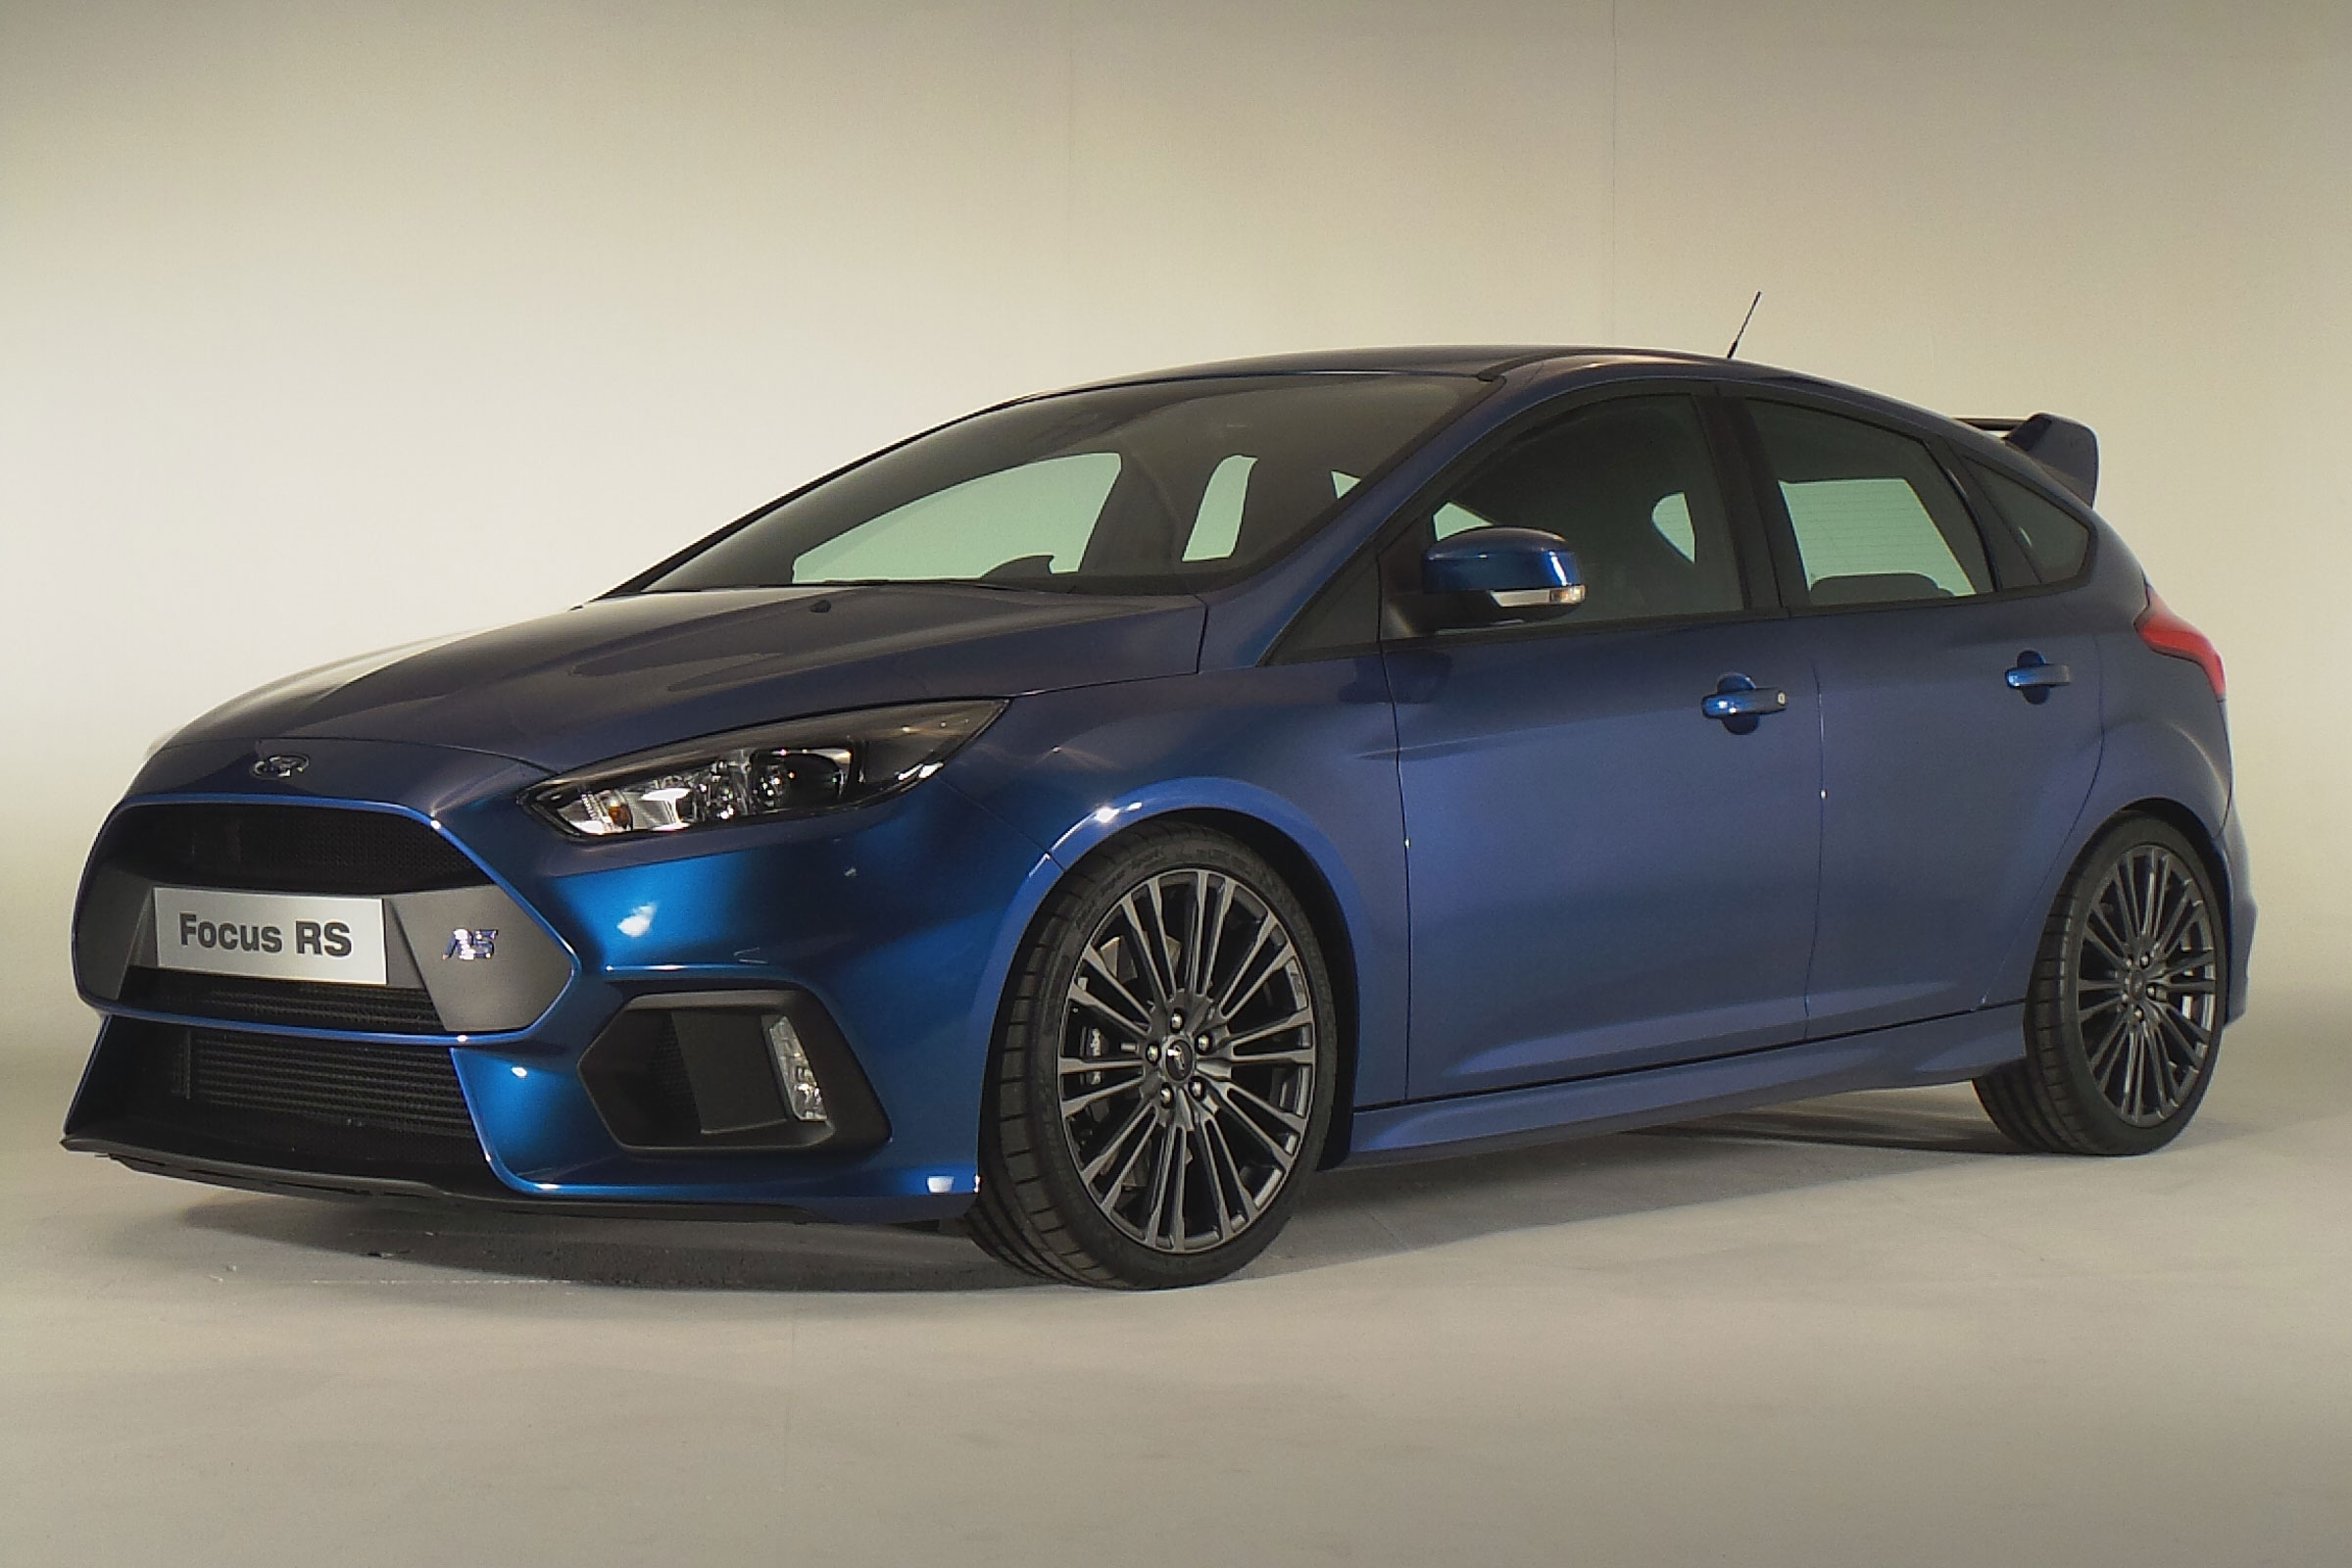 Ford Focus RS 2015 Wallpaper   HD